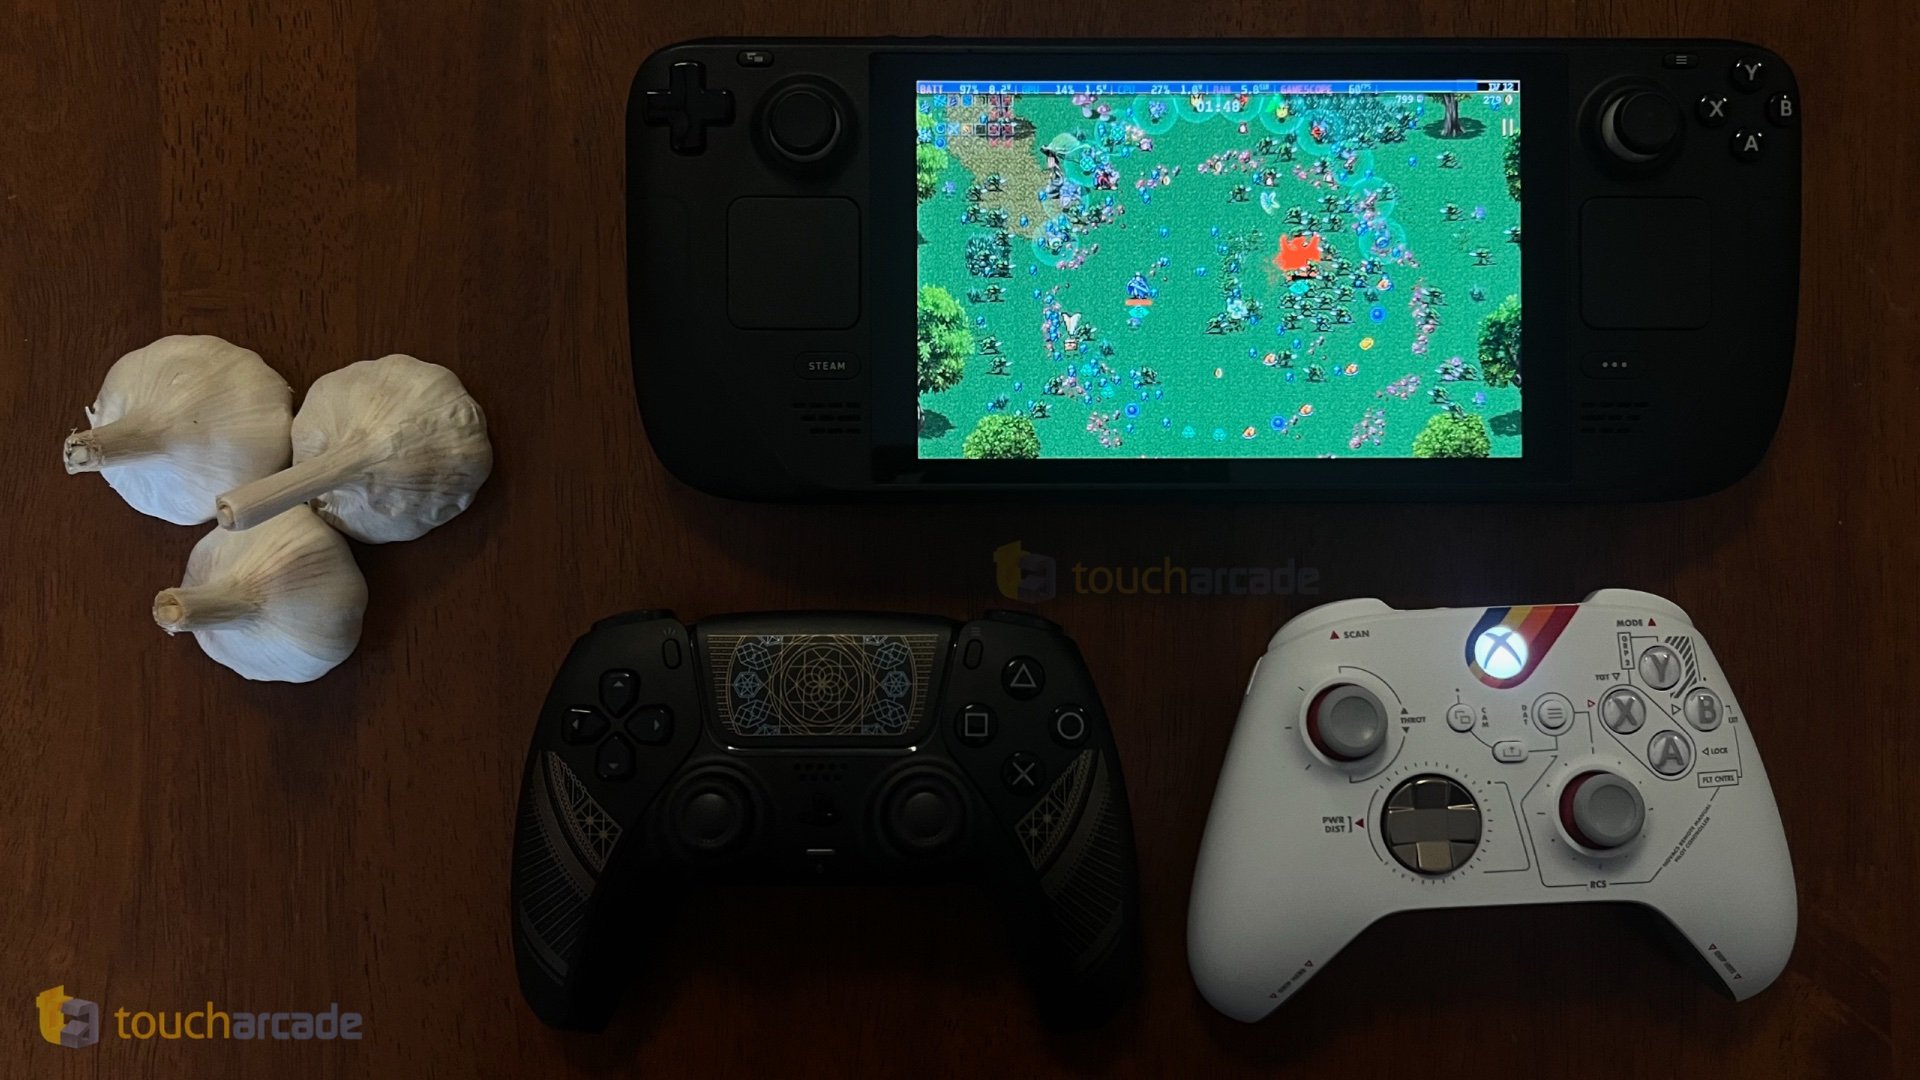 Steam's Remote Play Together brings any local multiplayer game online